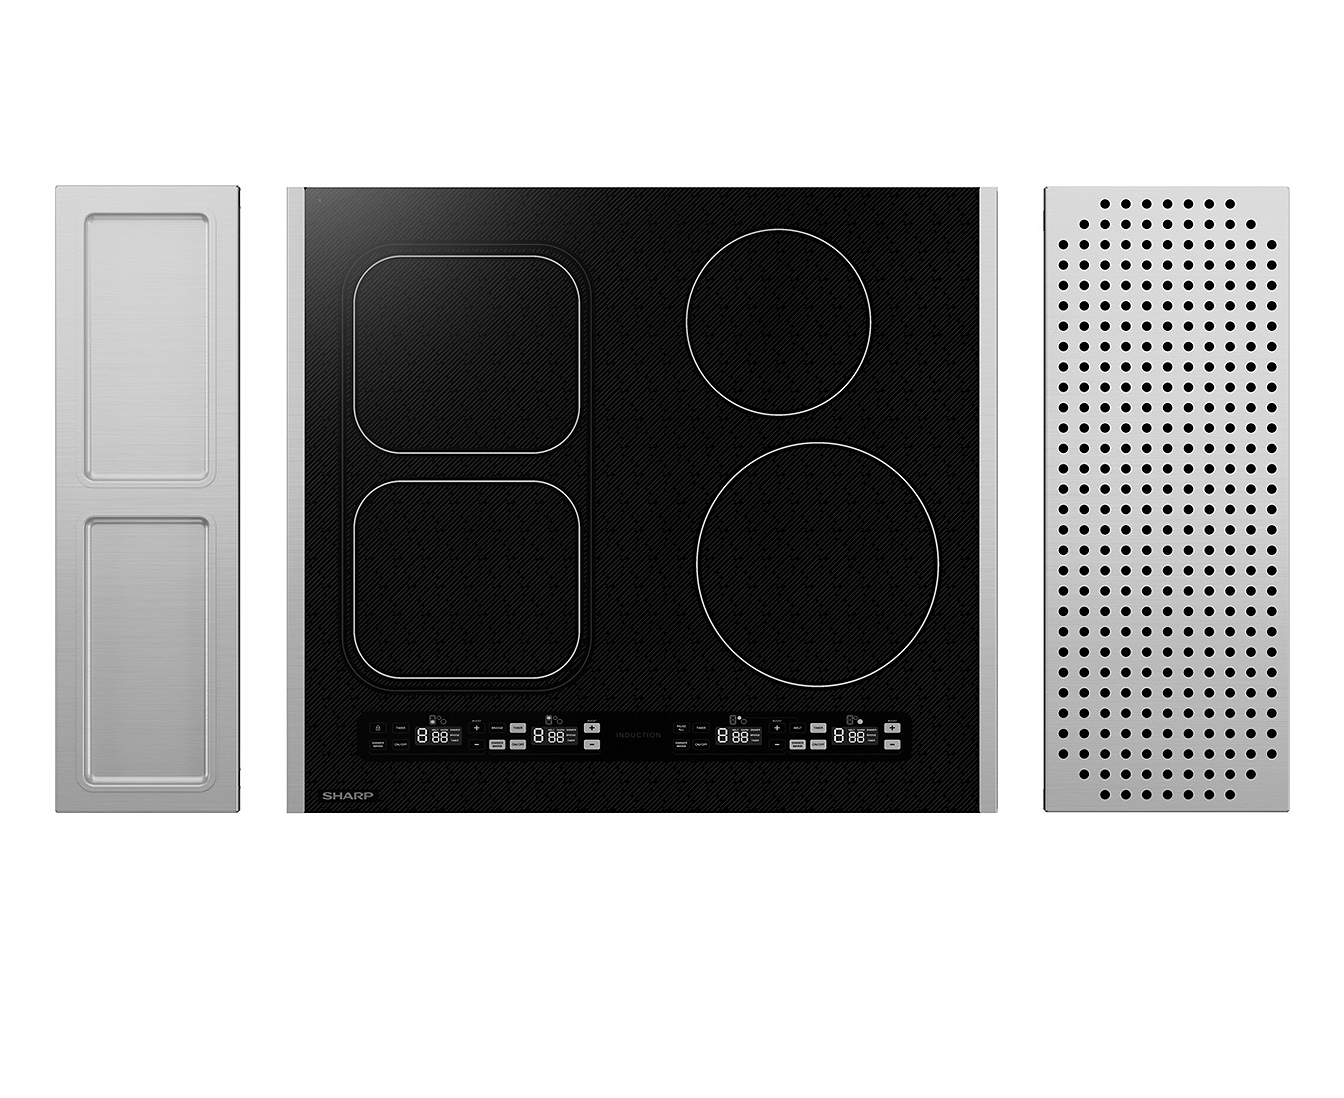 Sharp - 24 inch wide Induction Cooktop in Black - SCH2443GB